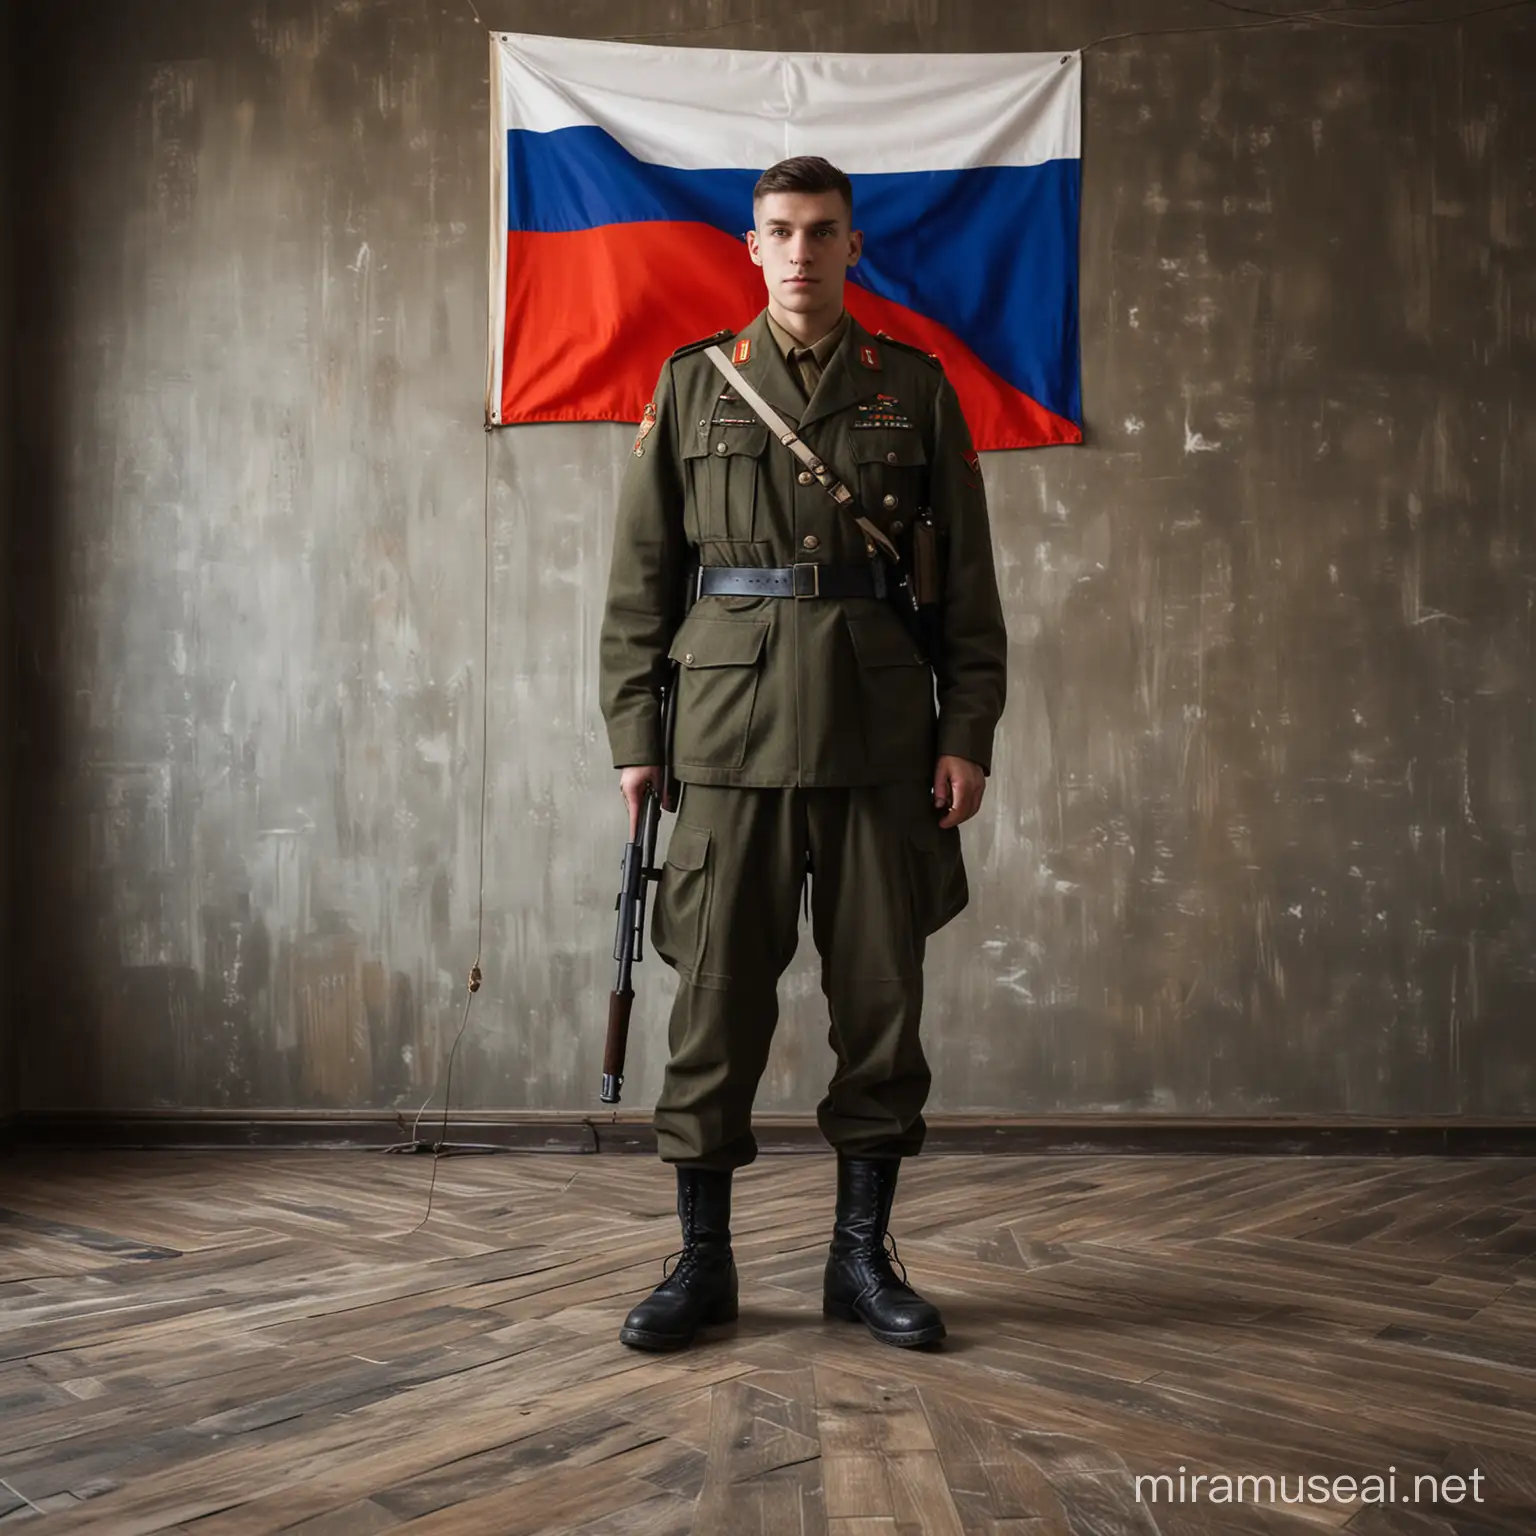 Russian Soldier Standing Before WWII Military Era Flag